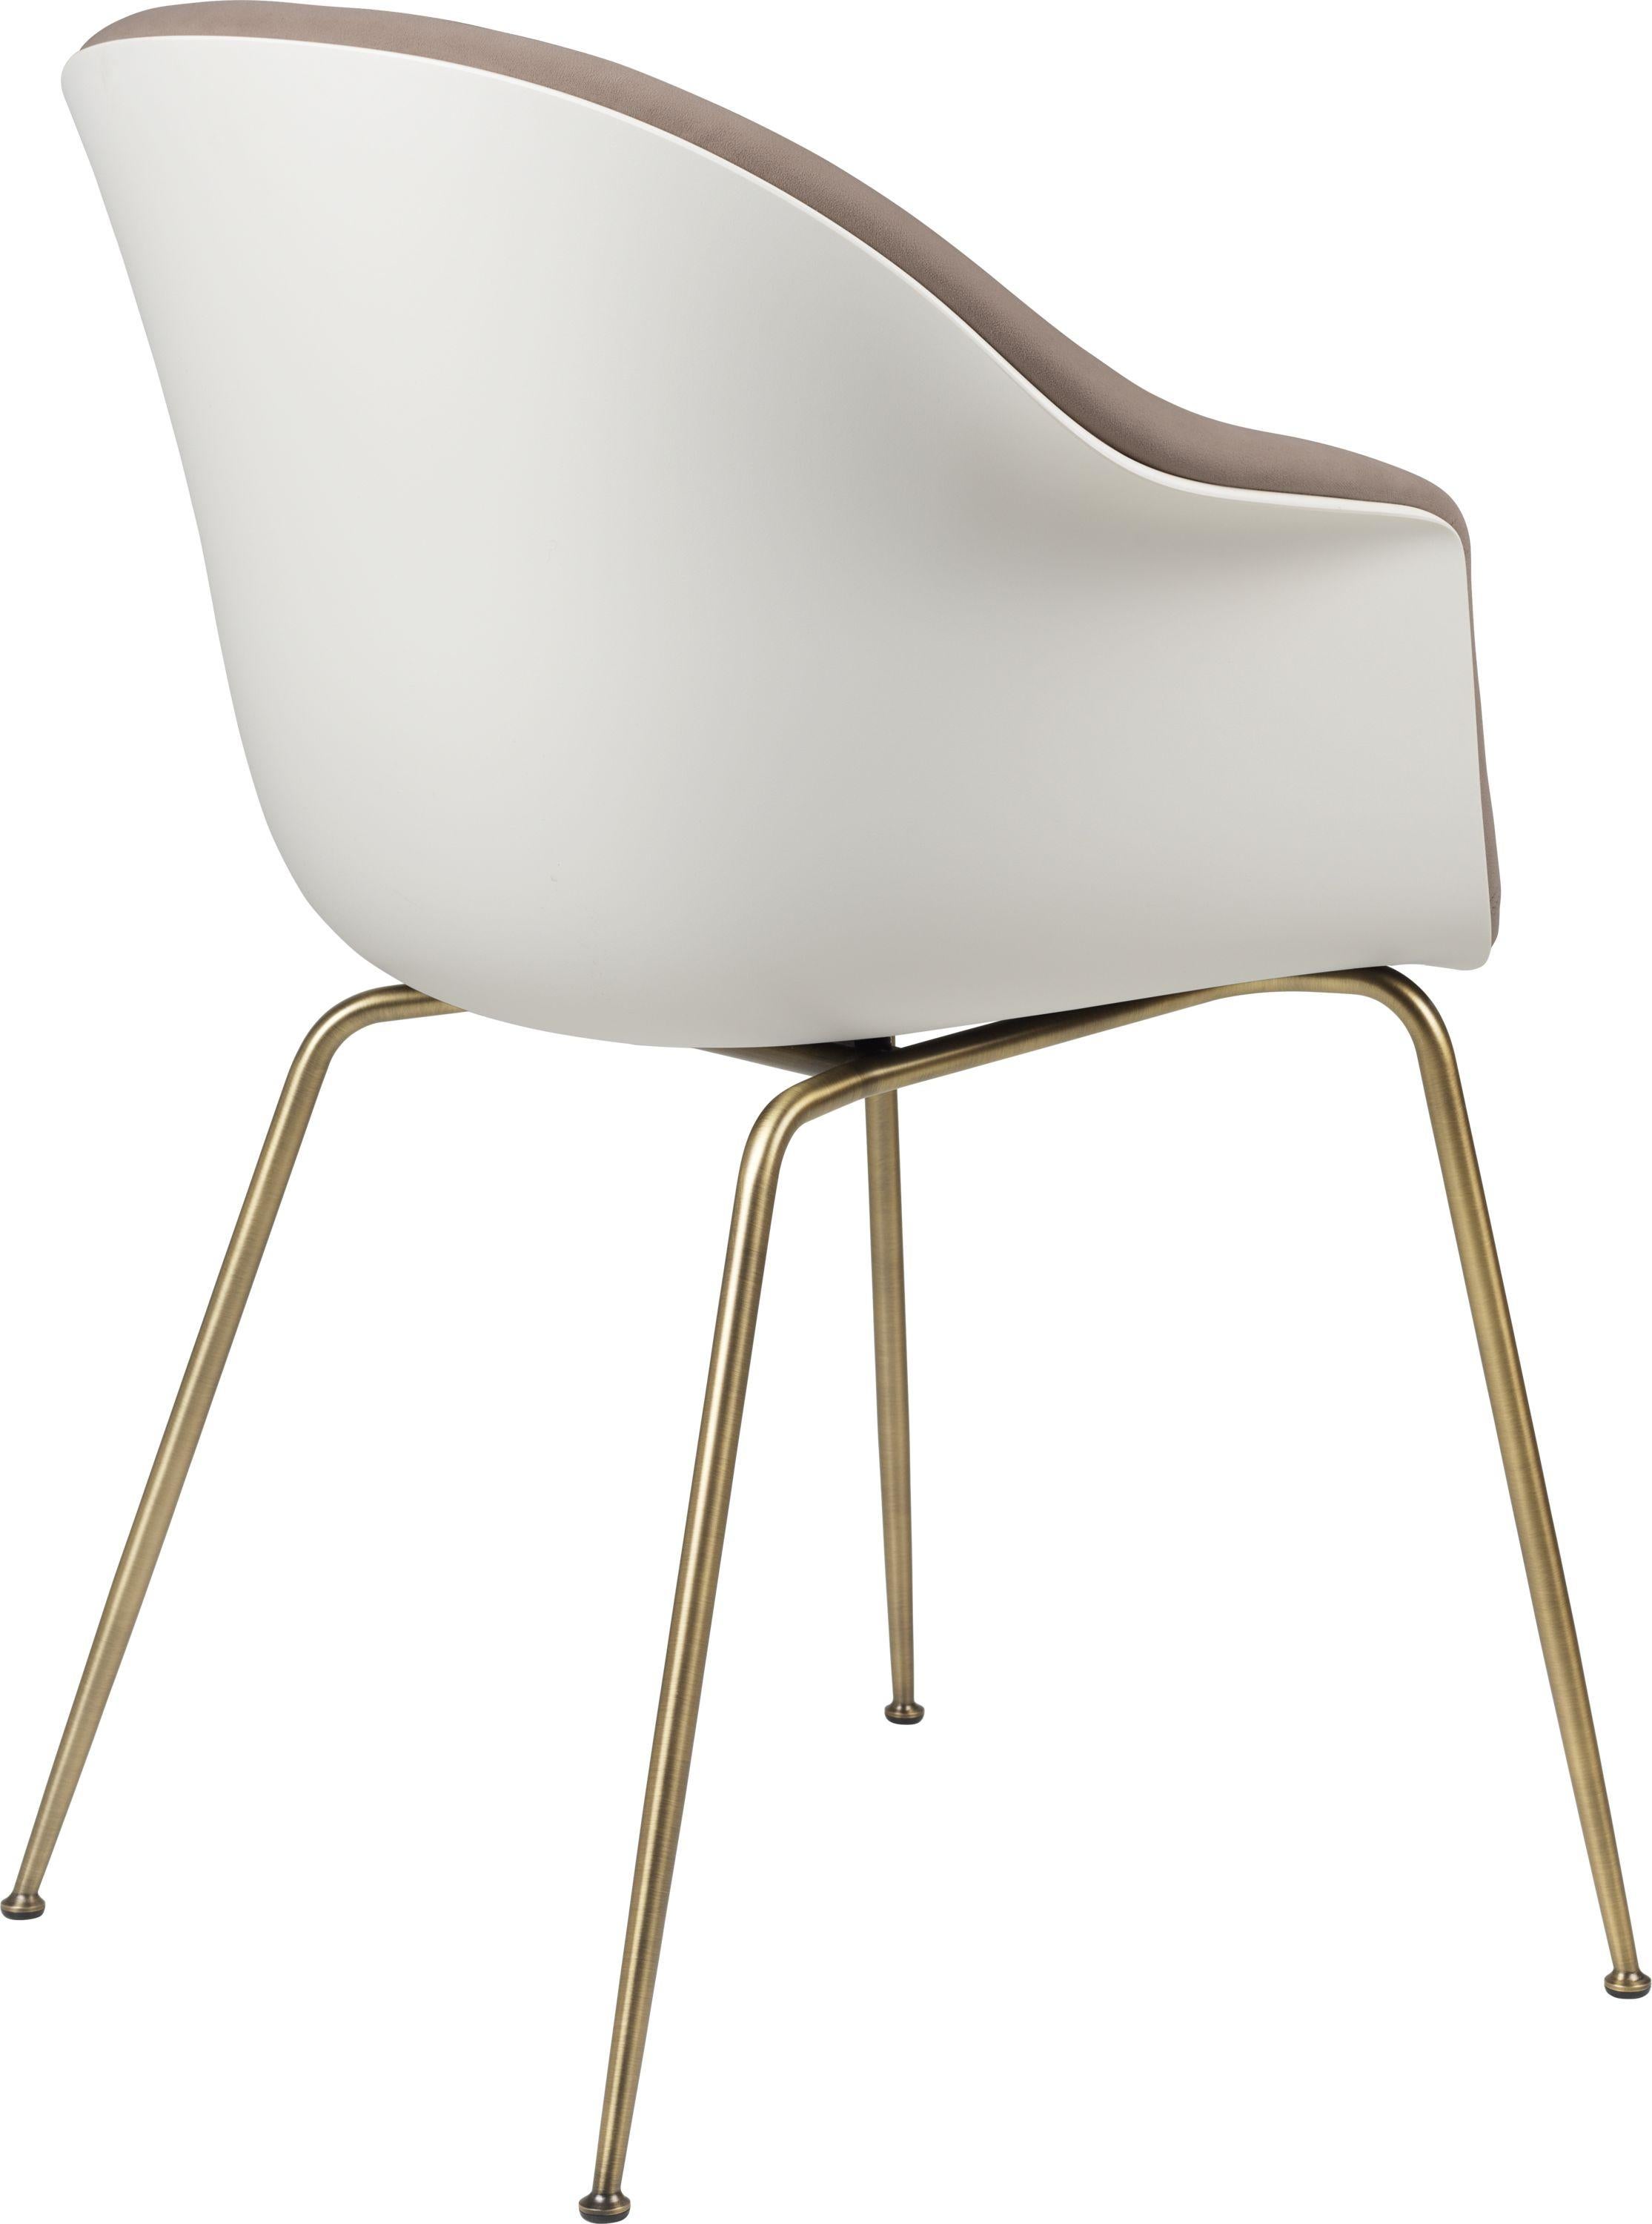 GamFratesi 'Bat' dining chair in brown and white with antique brass conic base. Designed by Danish-Italian design-duo GamFratesi in 2018, the Bat dining chair is created with a Scandinavian approach to crafts, simplicity, and functionalism. The